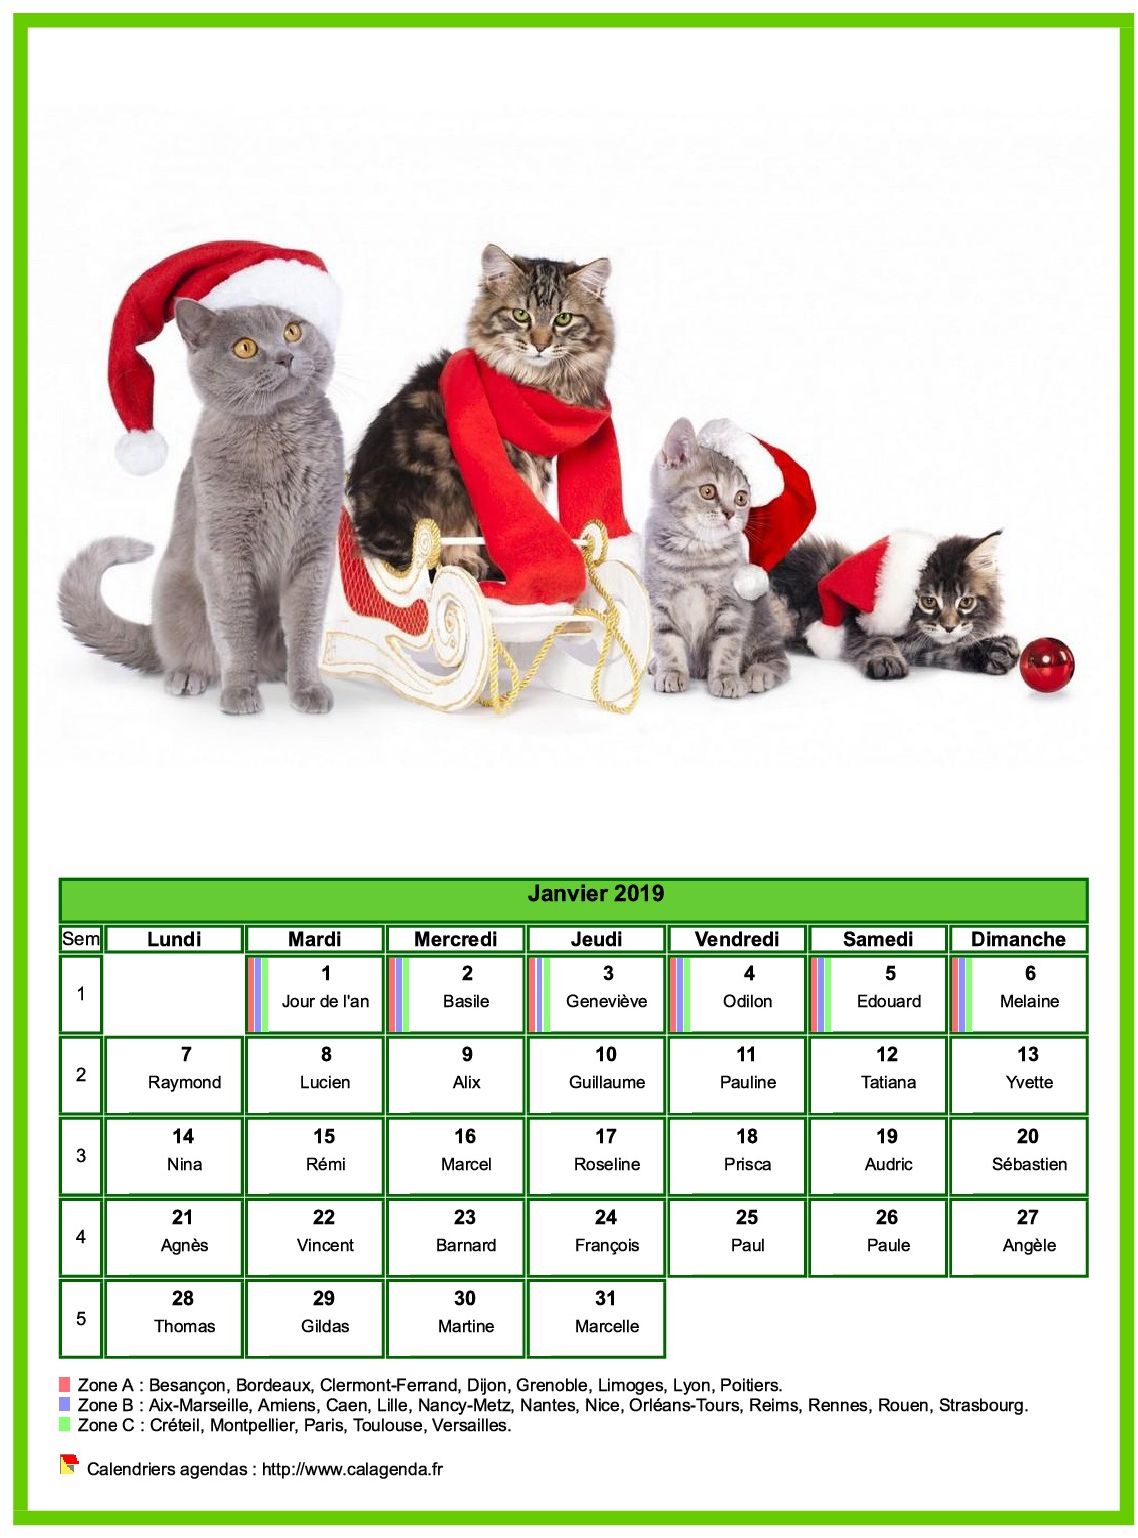 Calendrier janvier 2019 chats